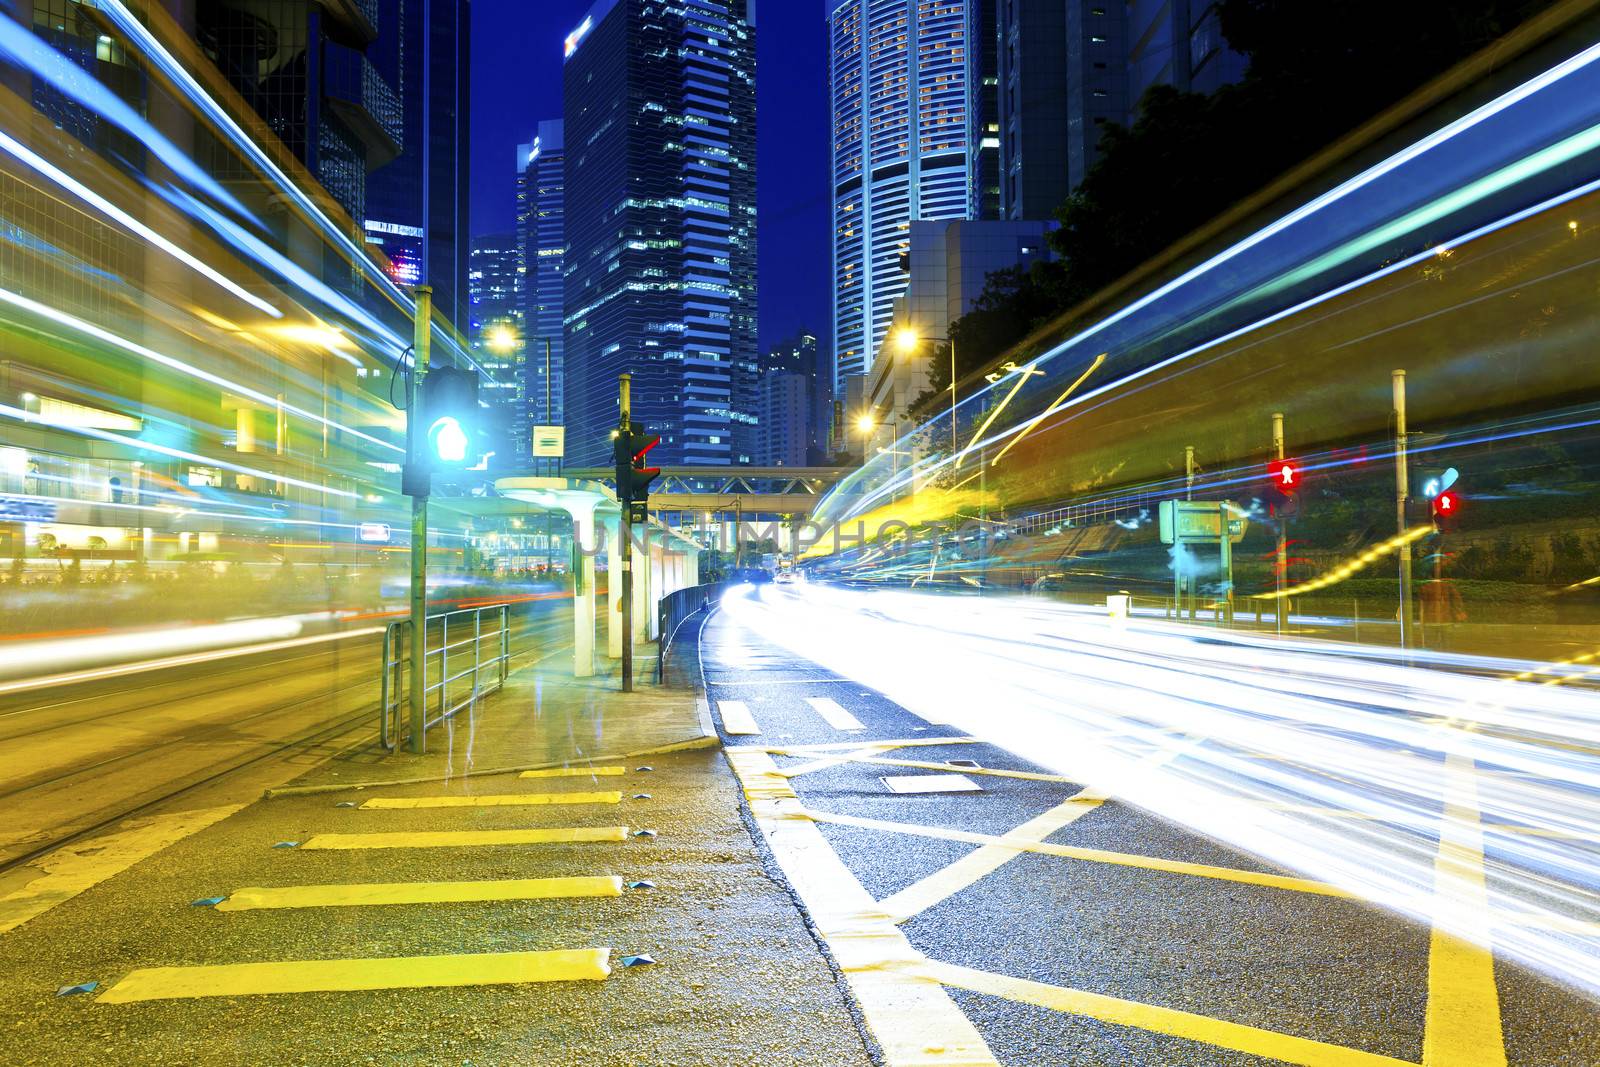 The light trails on the modern building backgrounds in Hong Kong